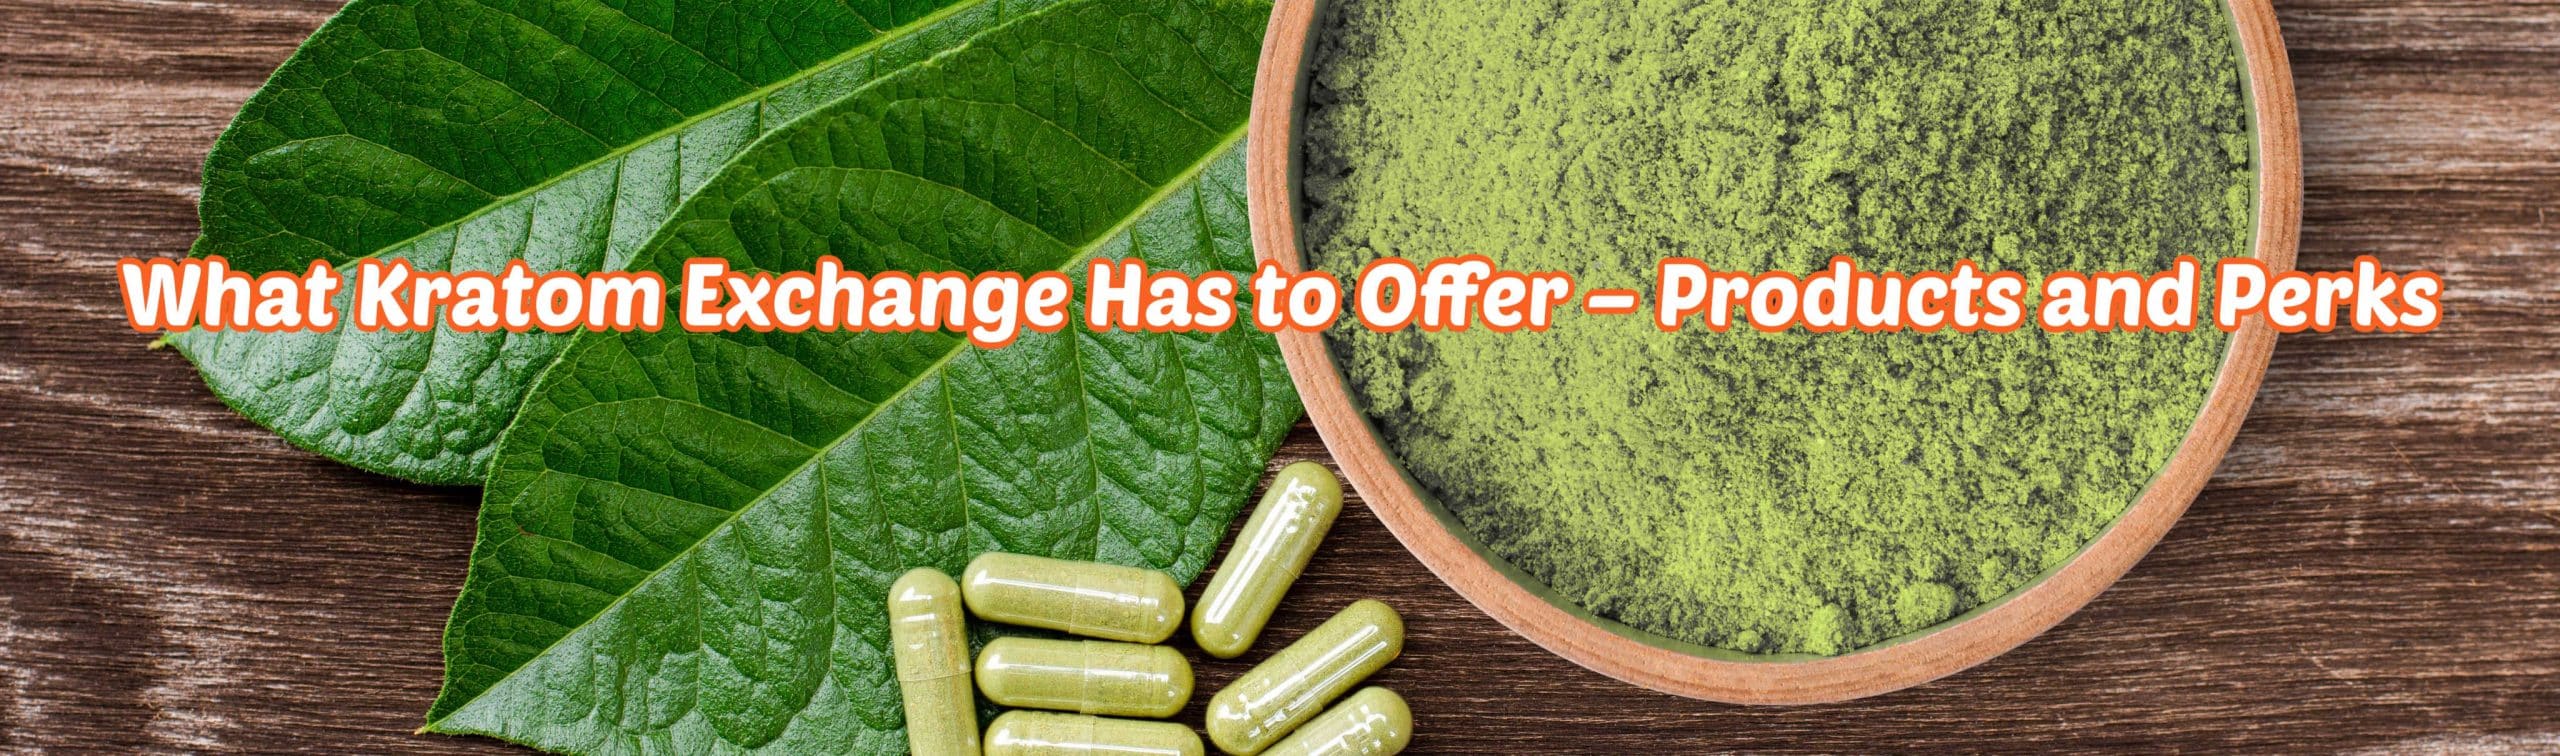 image of kratom exchange products and perks